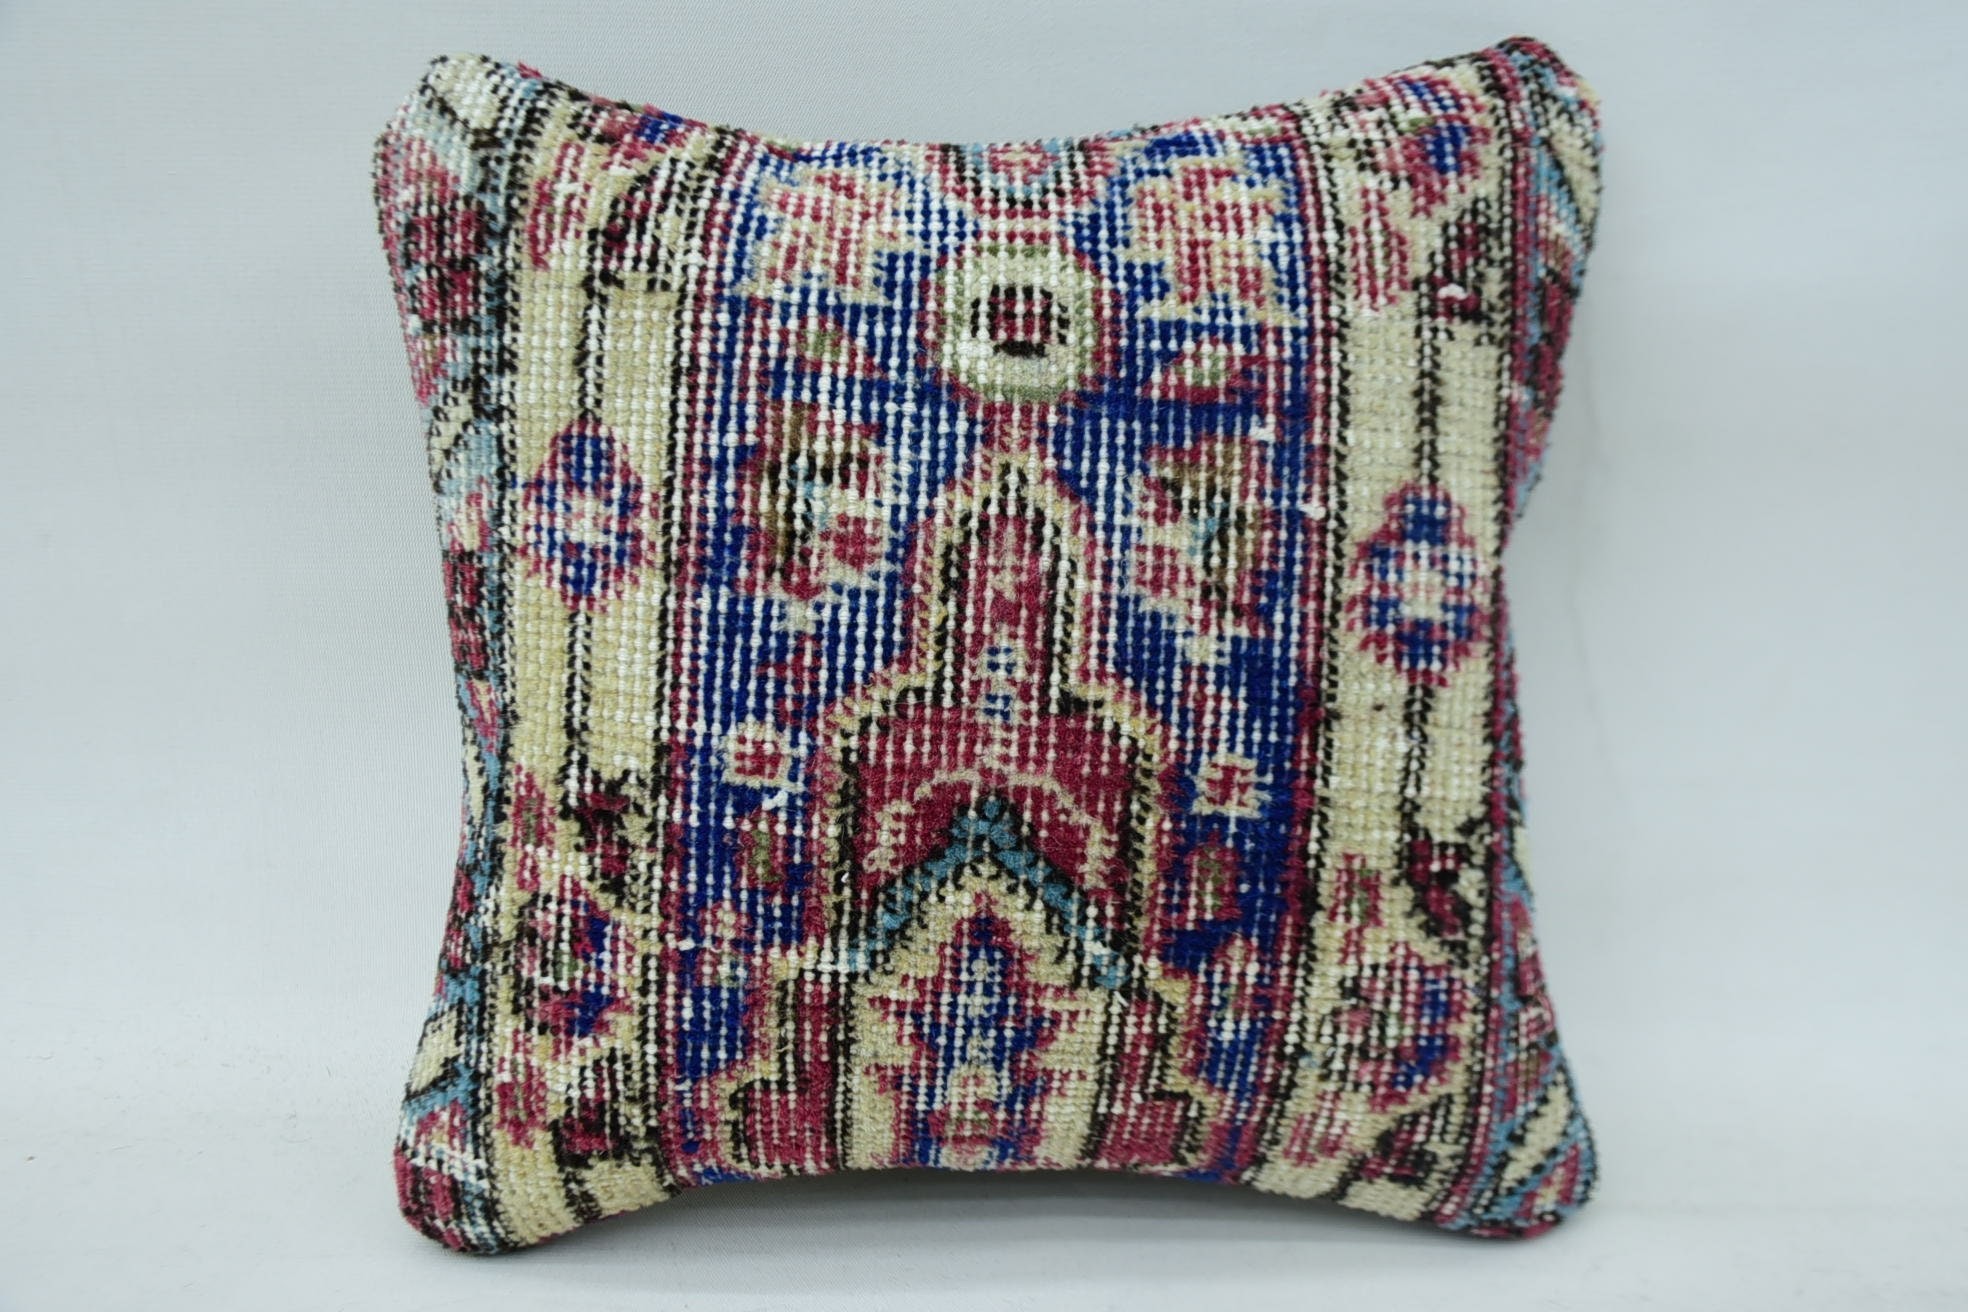 Pillow for Couch, Bolster Throw Cushion Case, Turkish Kilim Pillow, Gift Pillow, Vintage Kilim Pillow Pillow, 12"x12" Blue Cushion Case